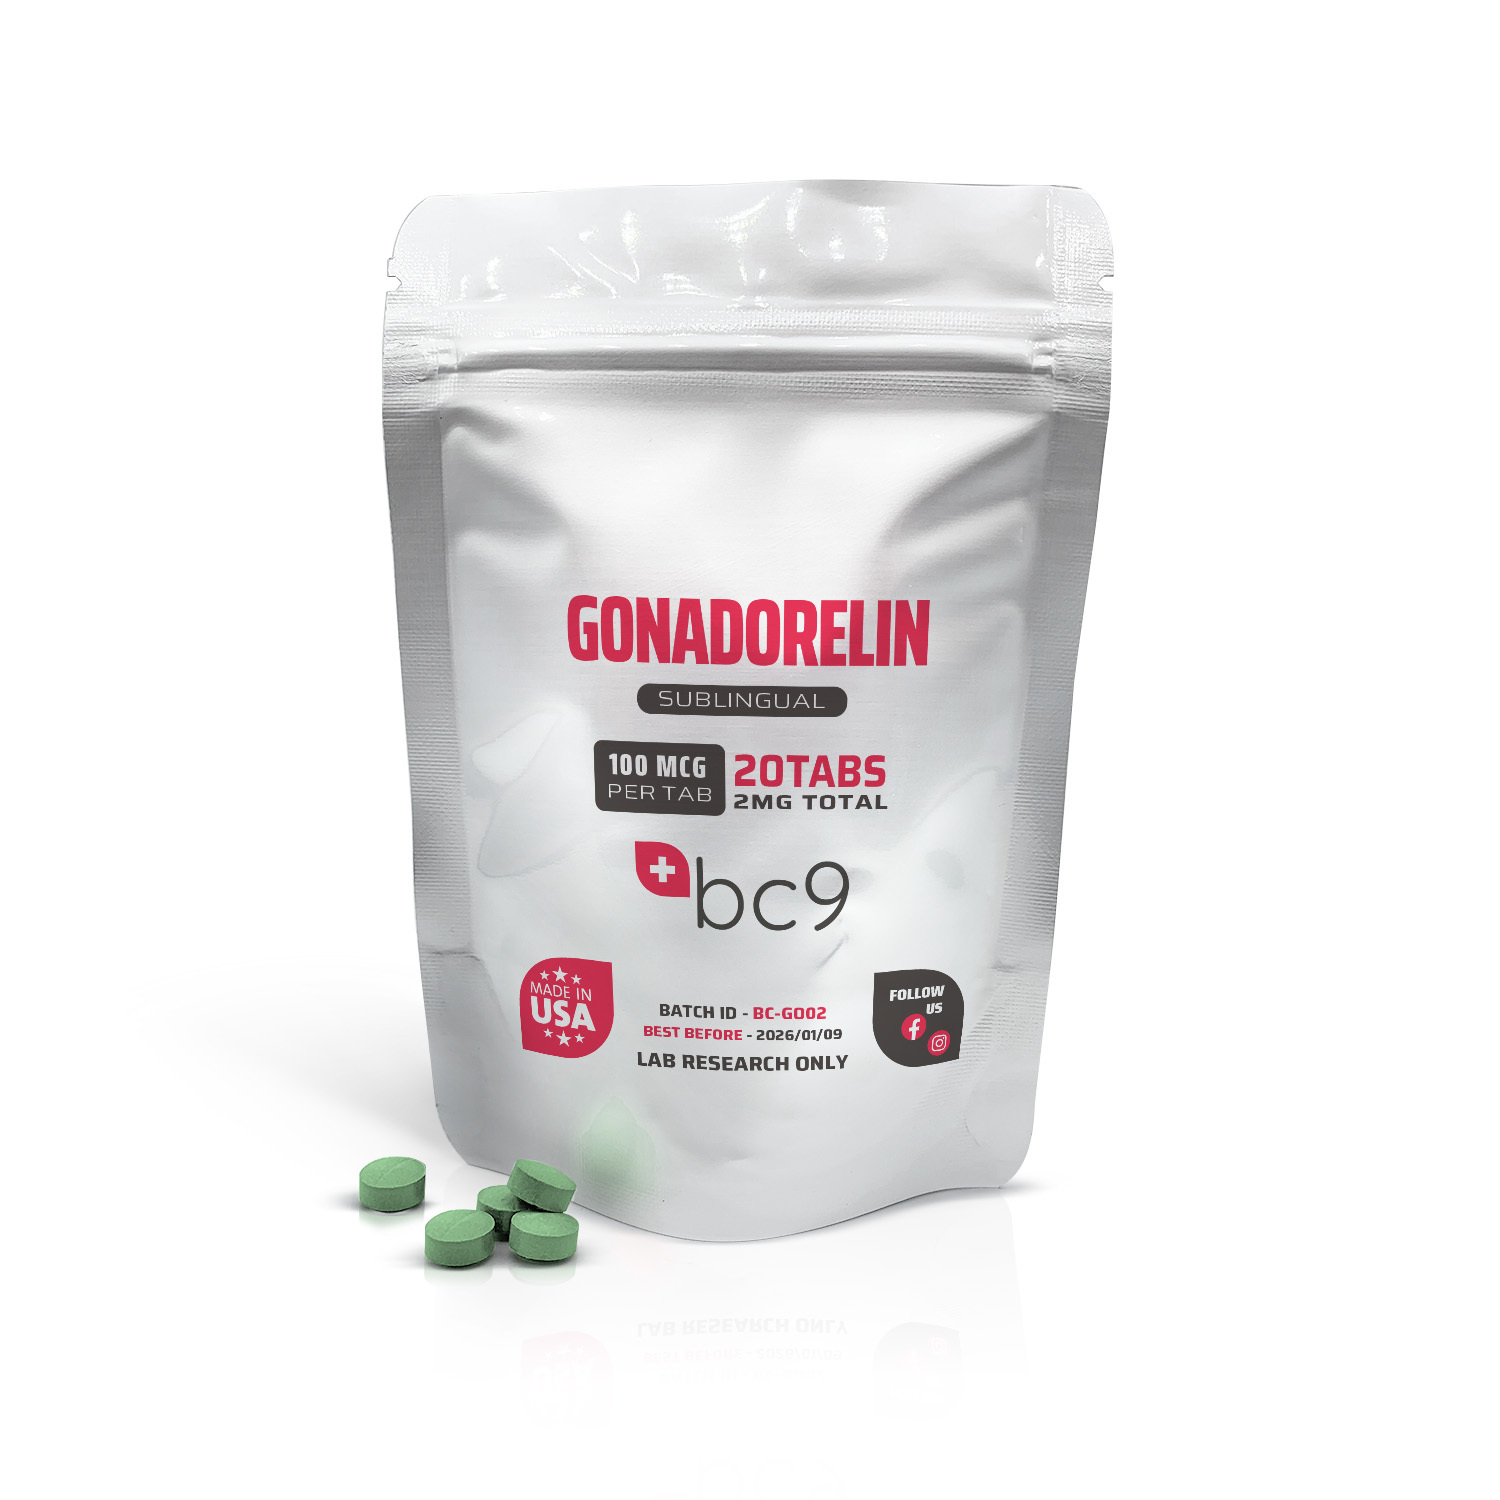 Gonadorelin Tablets For Sale | 3rd Party Tested | BC9.org